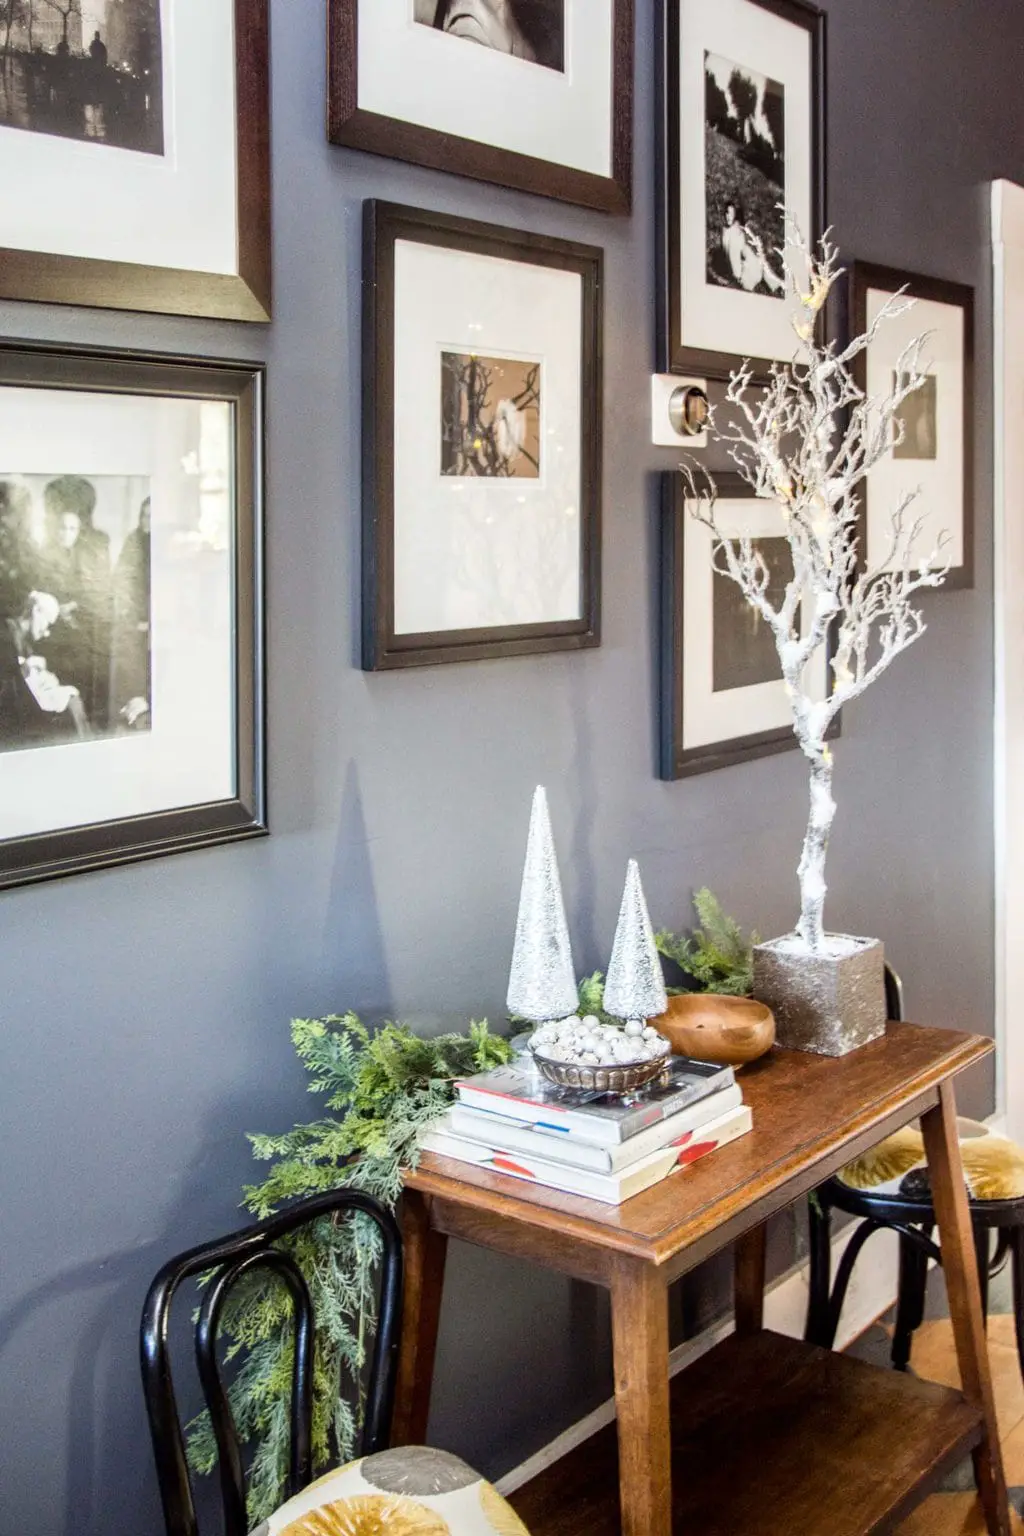 A Monochrome Holiday Entryway with Pier 1 - Thou Swell